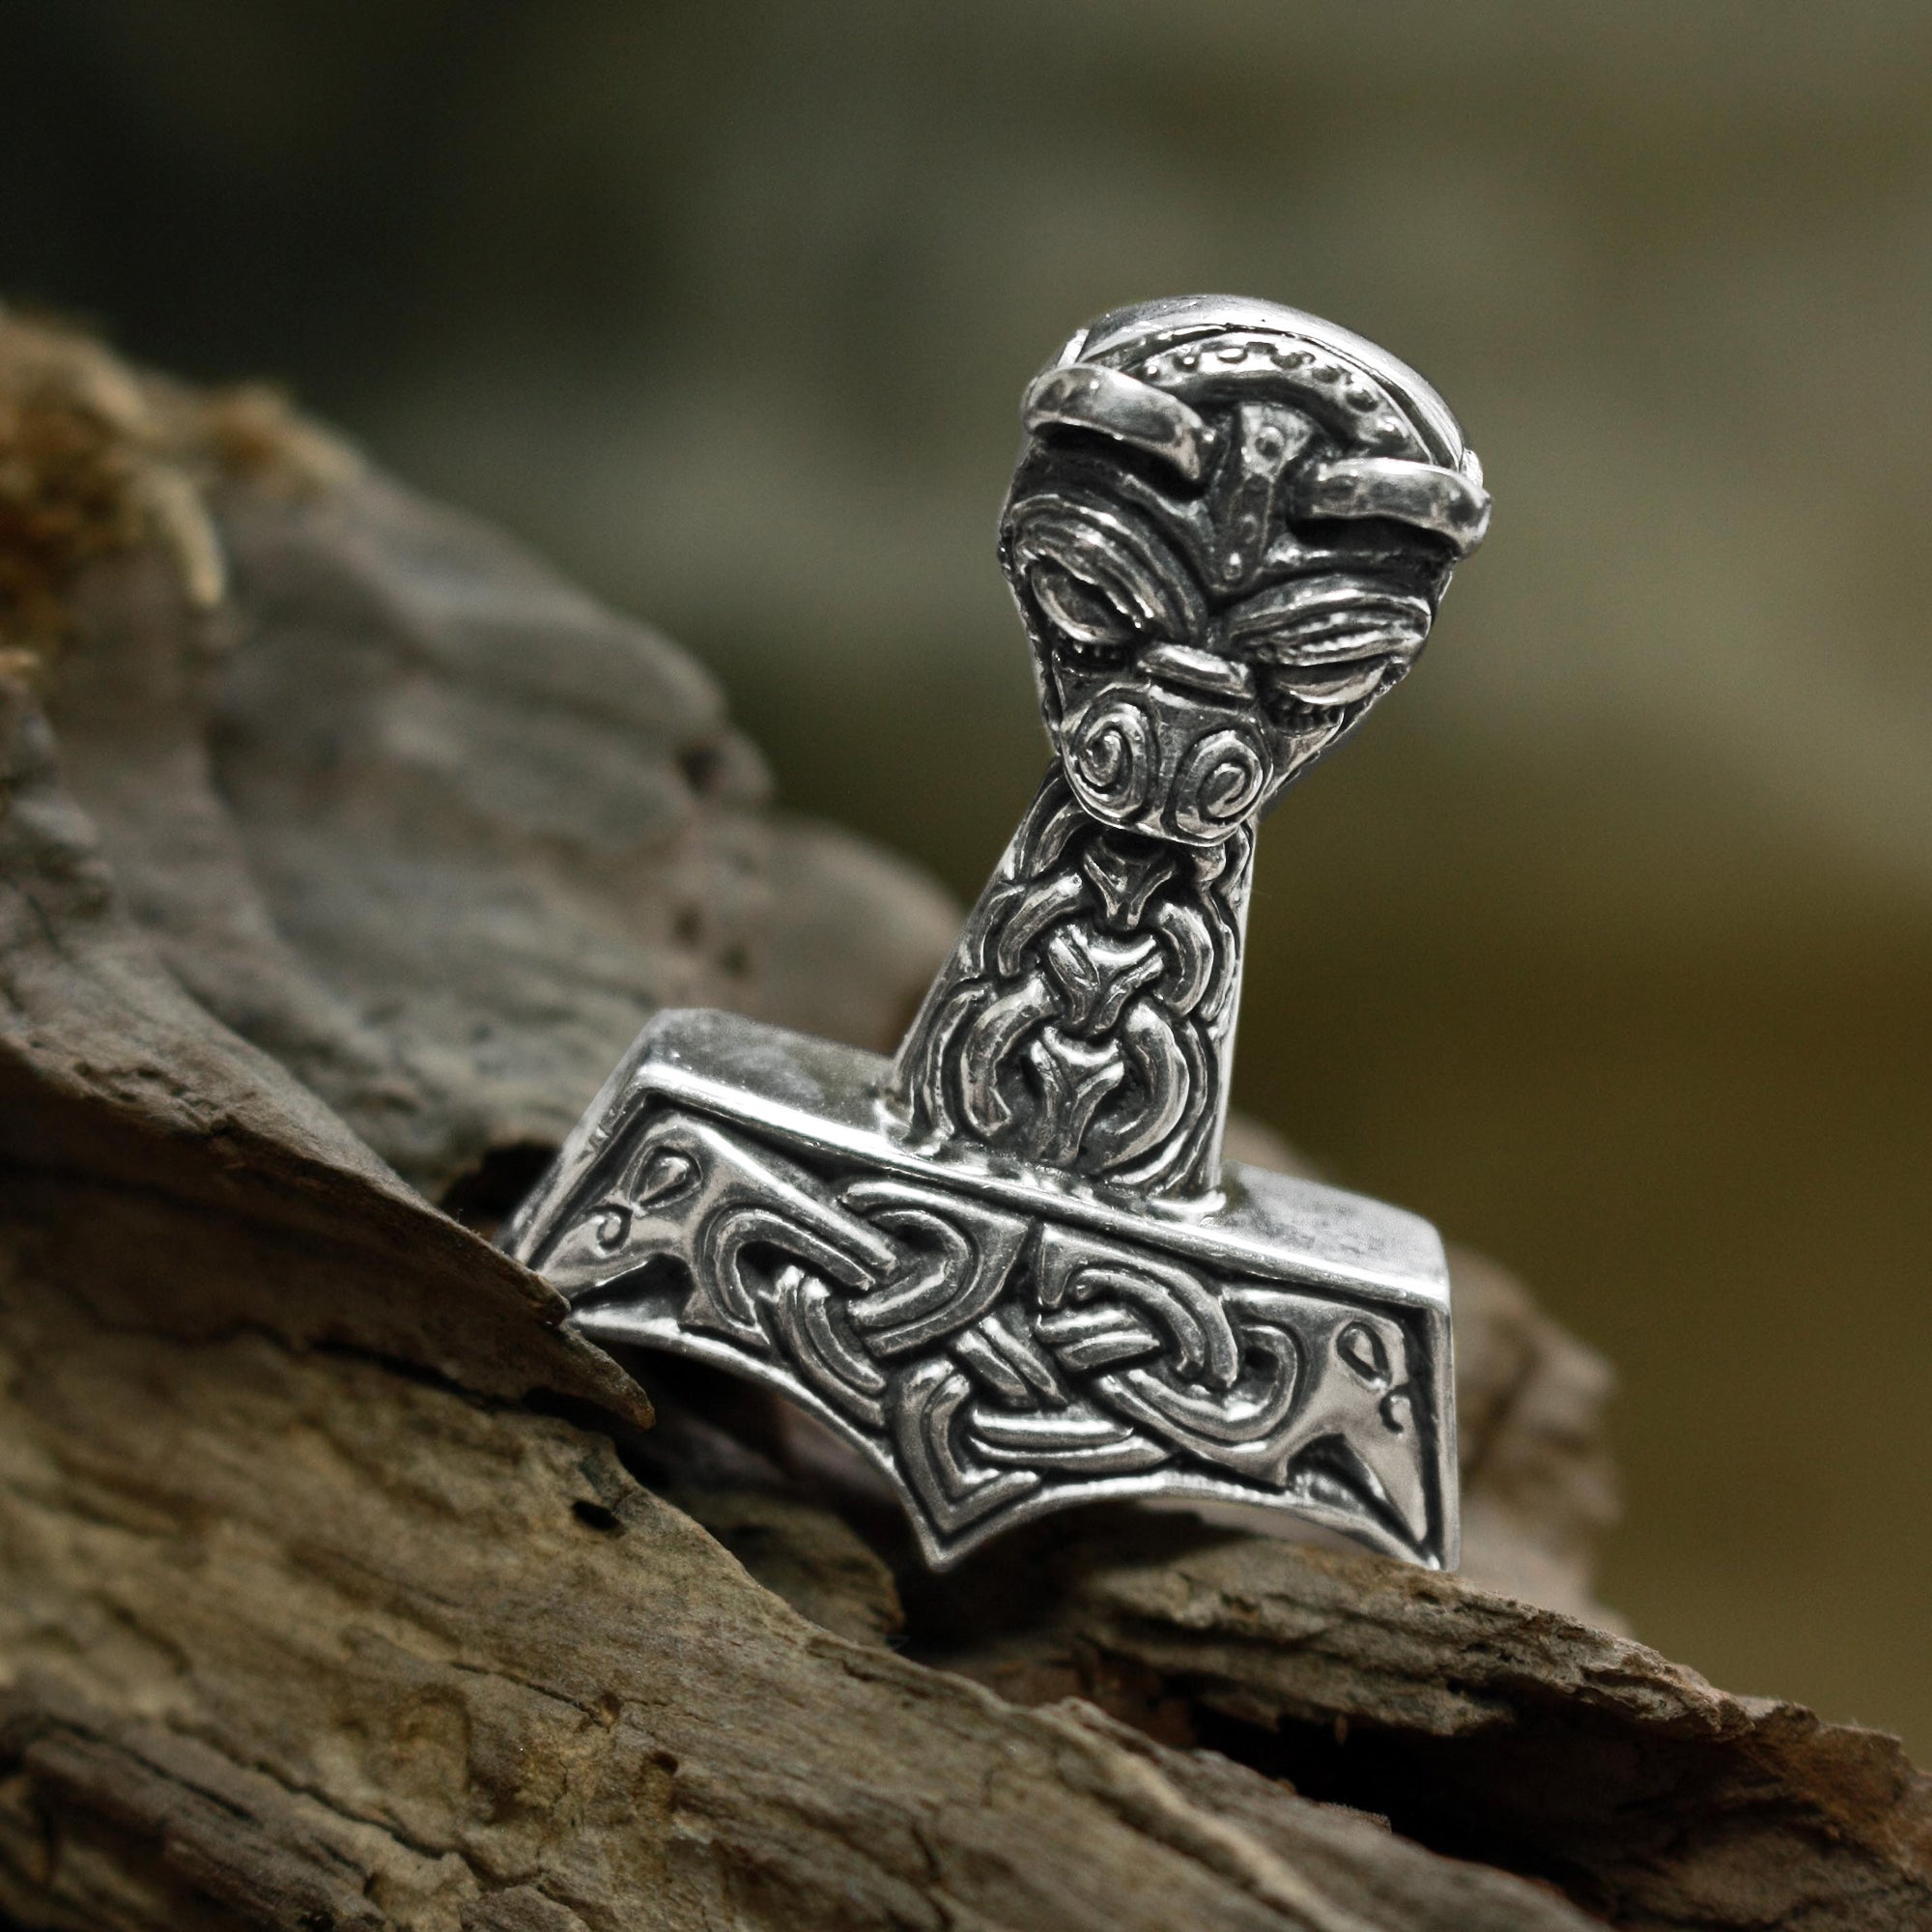 Large and Ferocious Thor's Hammer in 925 Sterling Silver - Thor's Hammer Pendants - Viking Jewelry